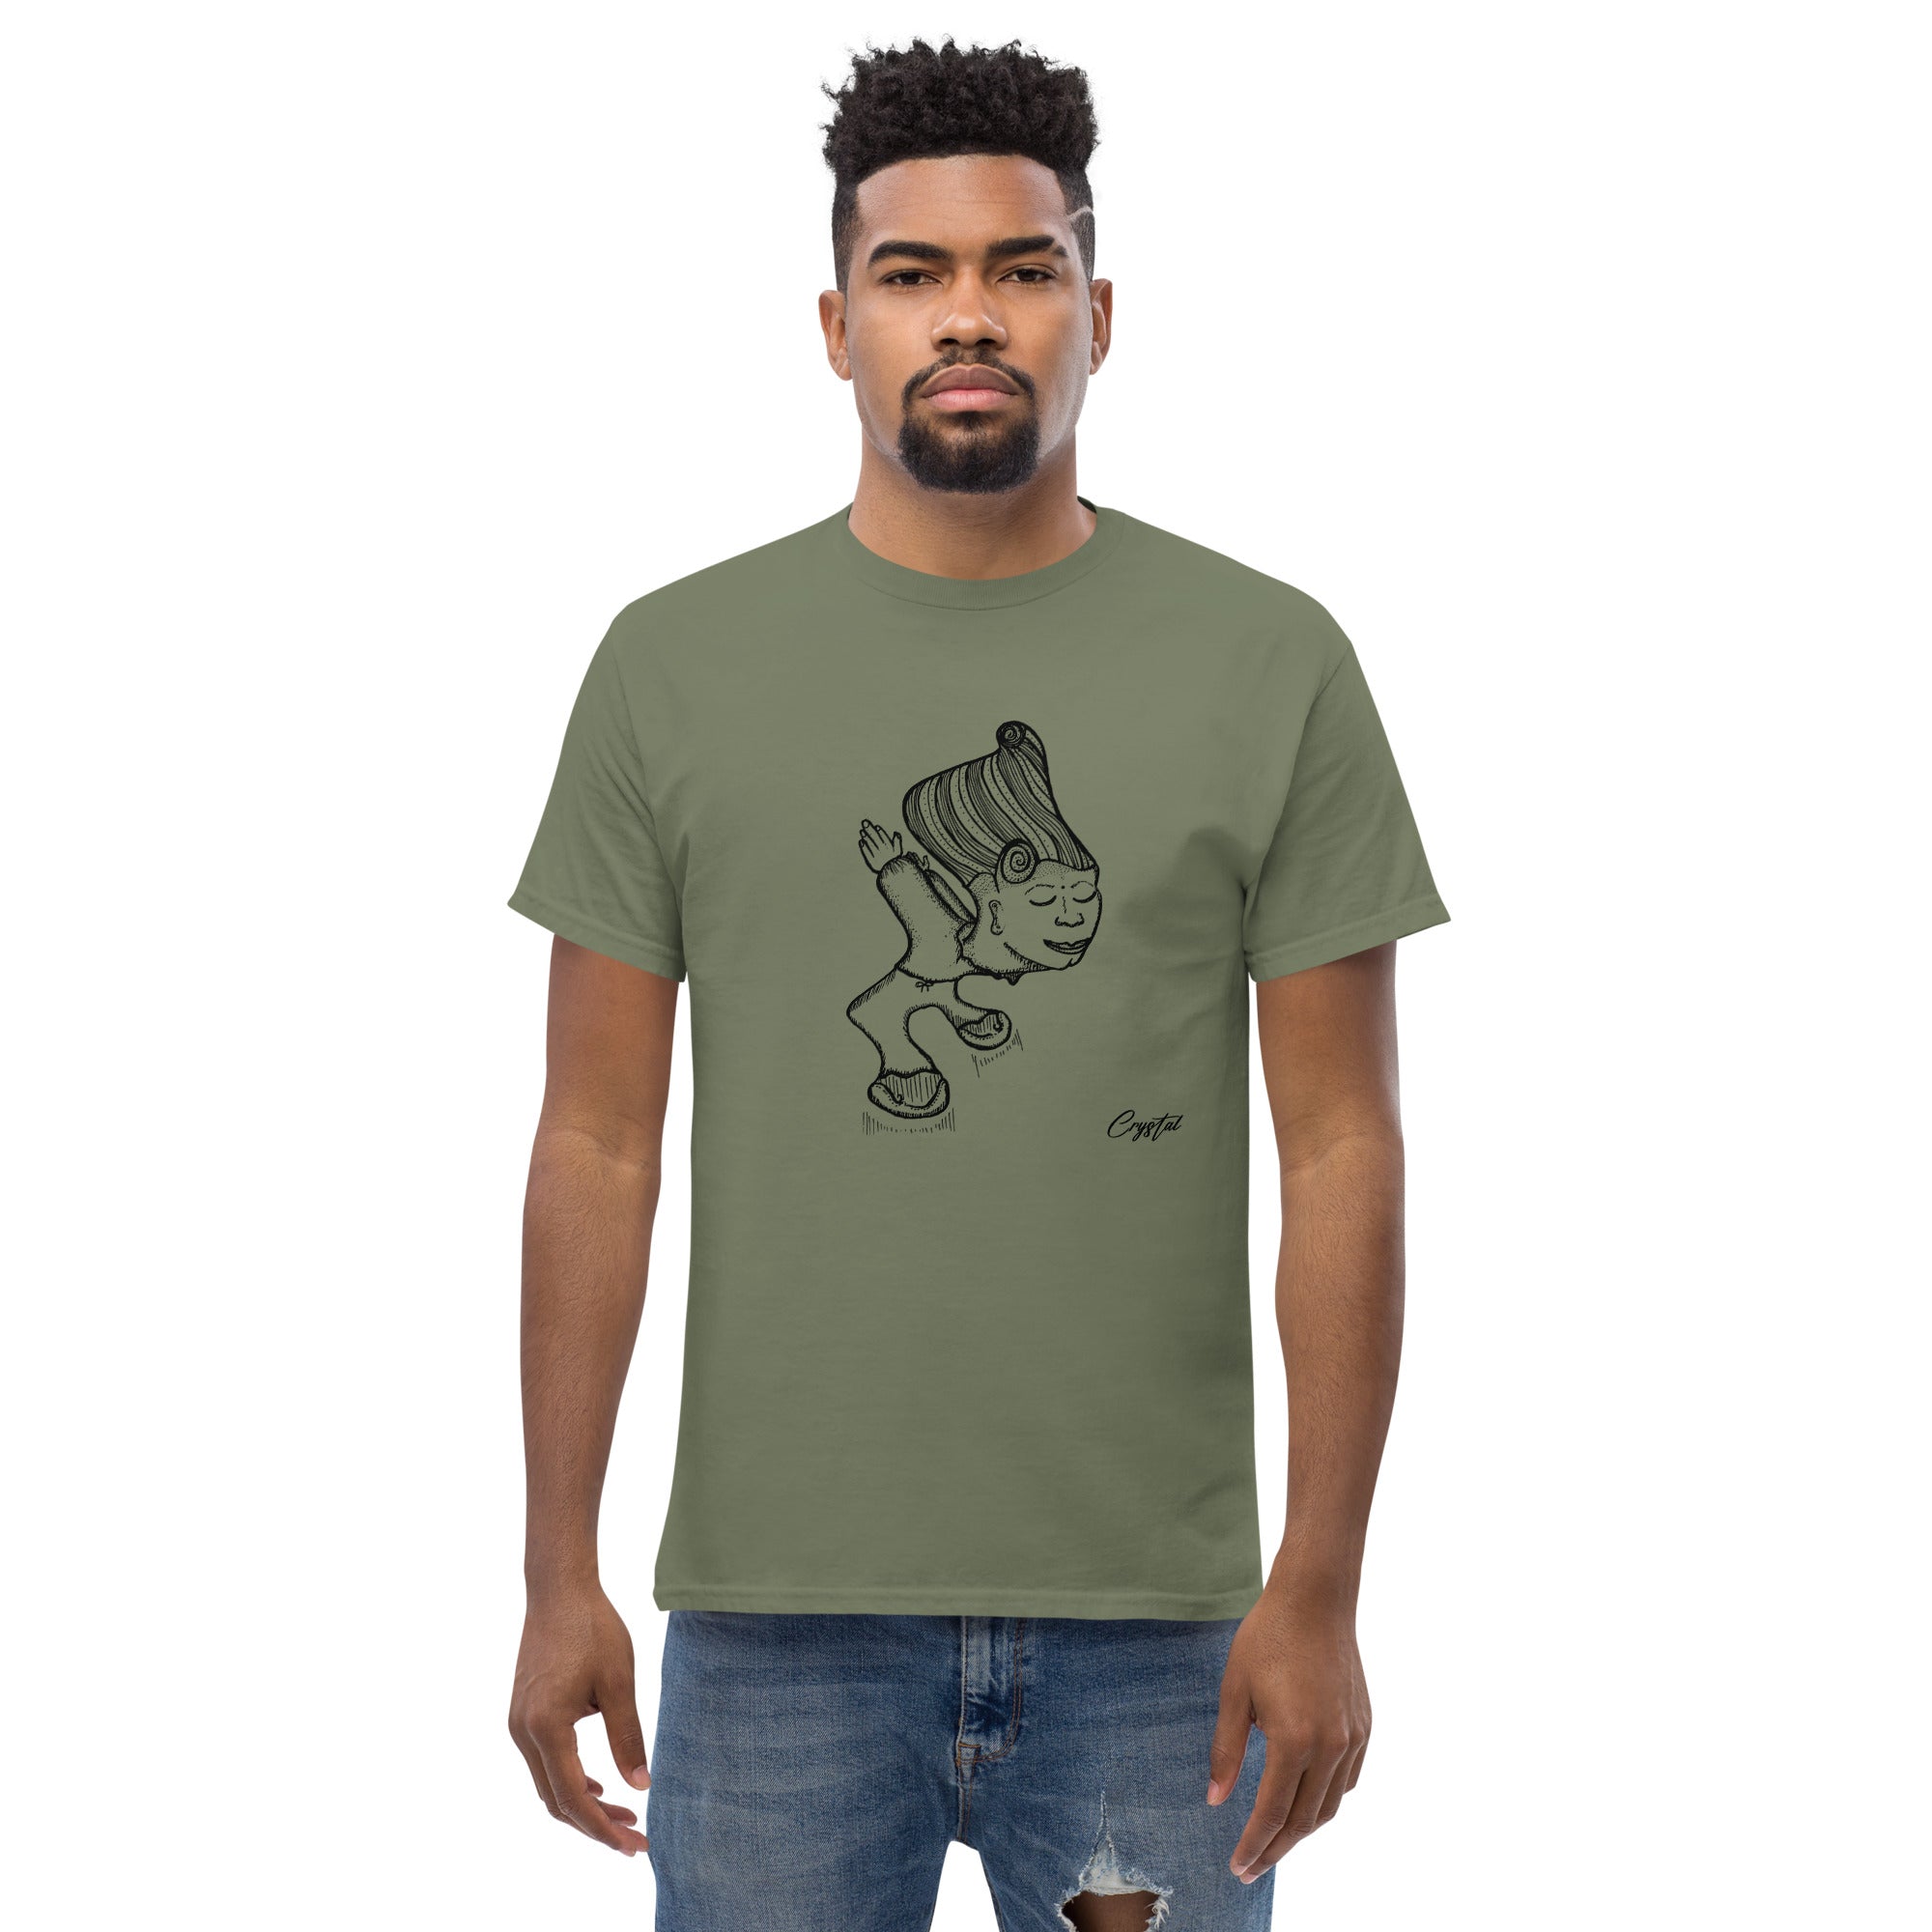 Genderless Person with Great Hair Bowing in Reverence or Gratitude - Cute & Creepy "Stay Weird" Cartoon Illustration Men's classic tee